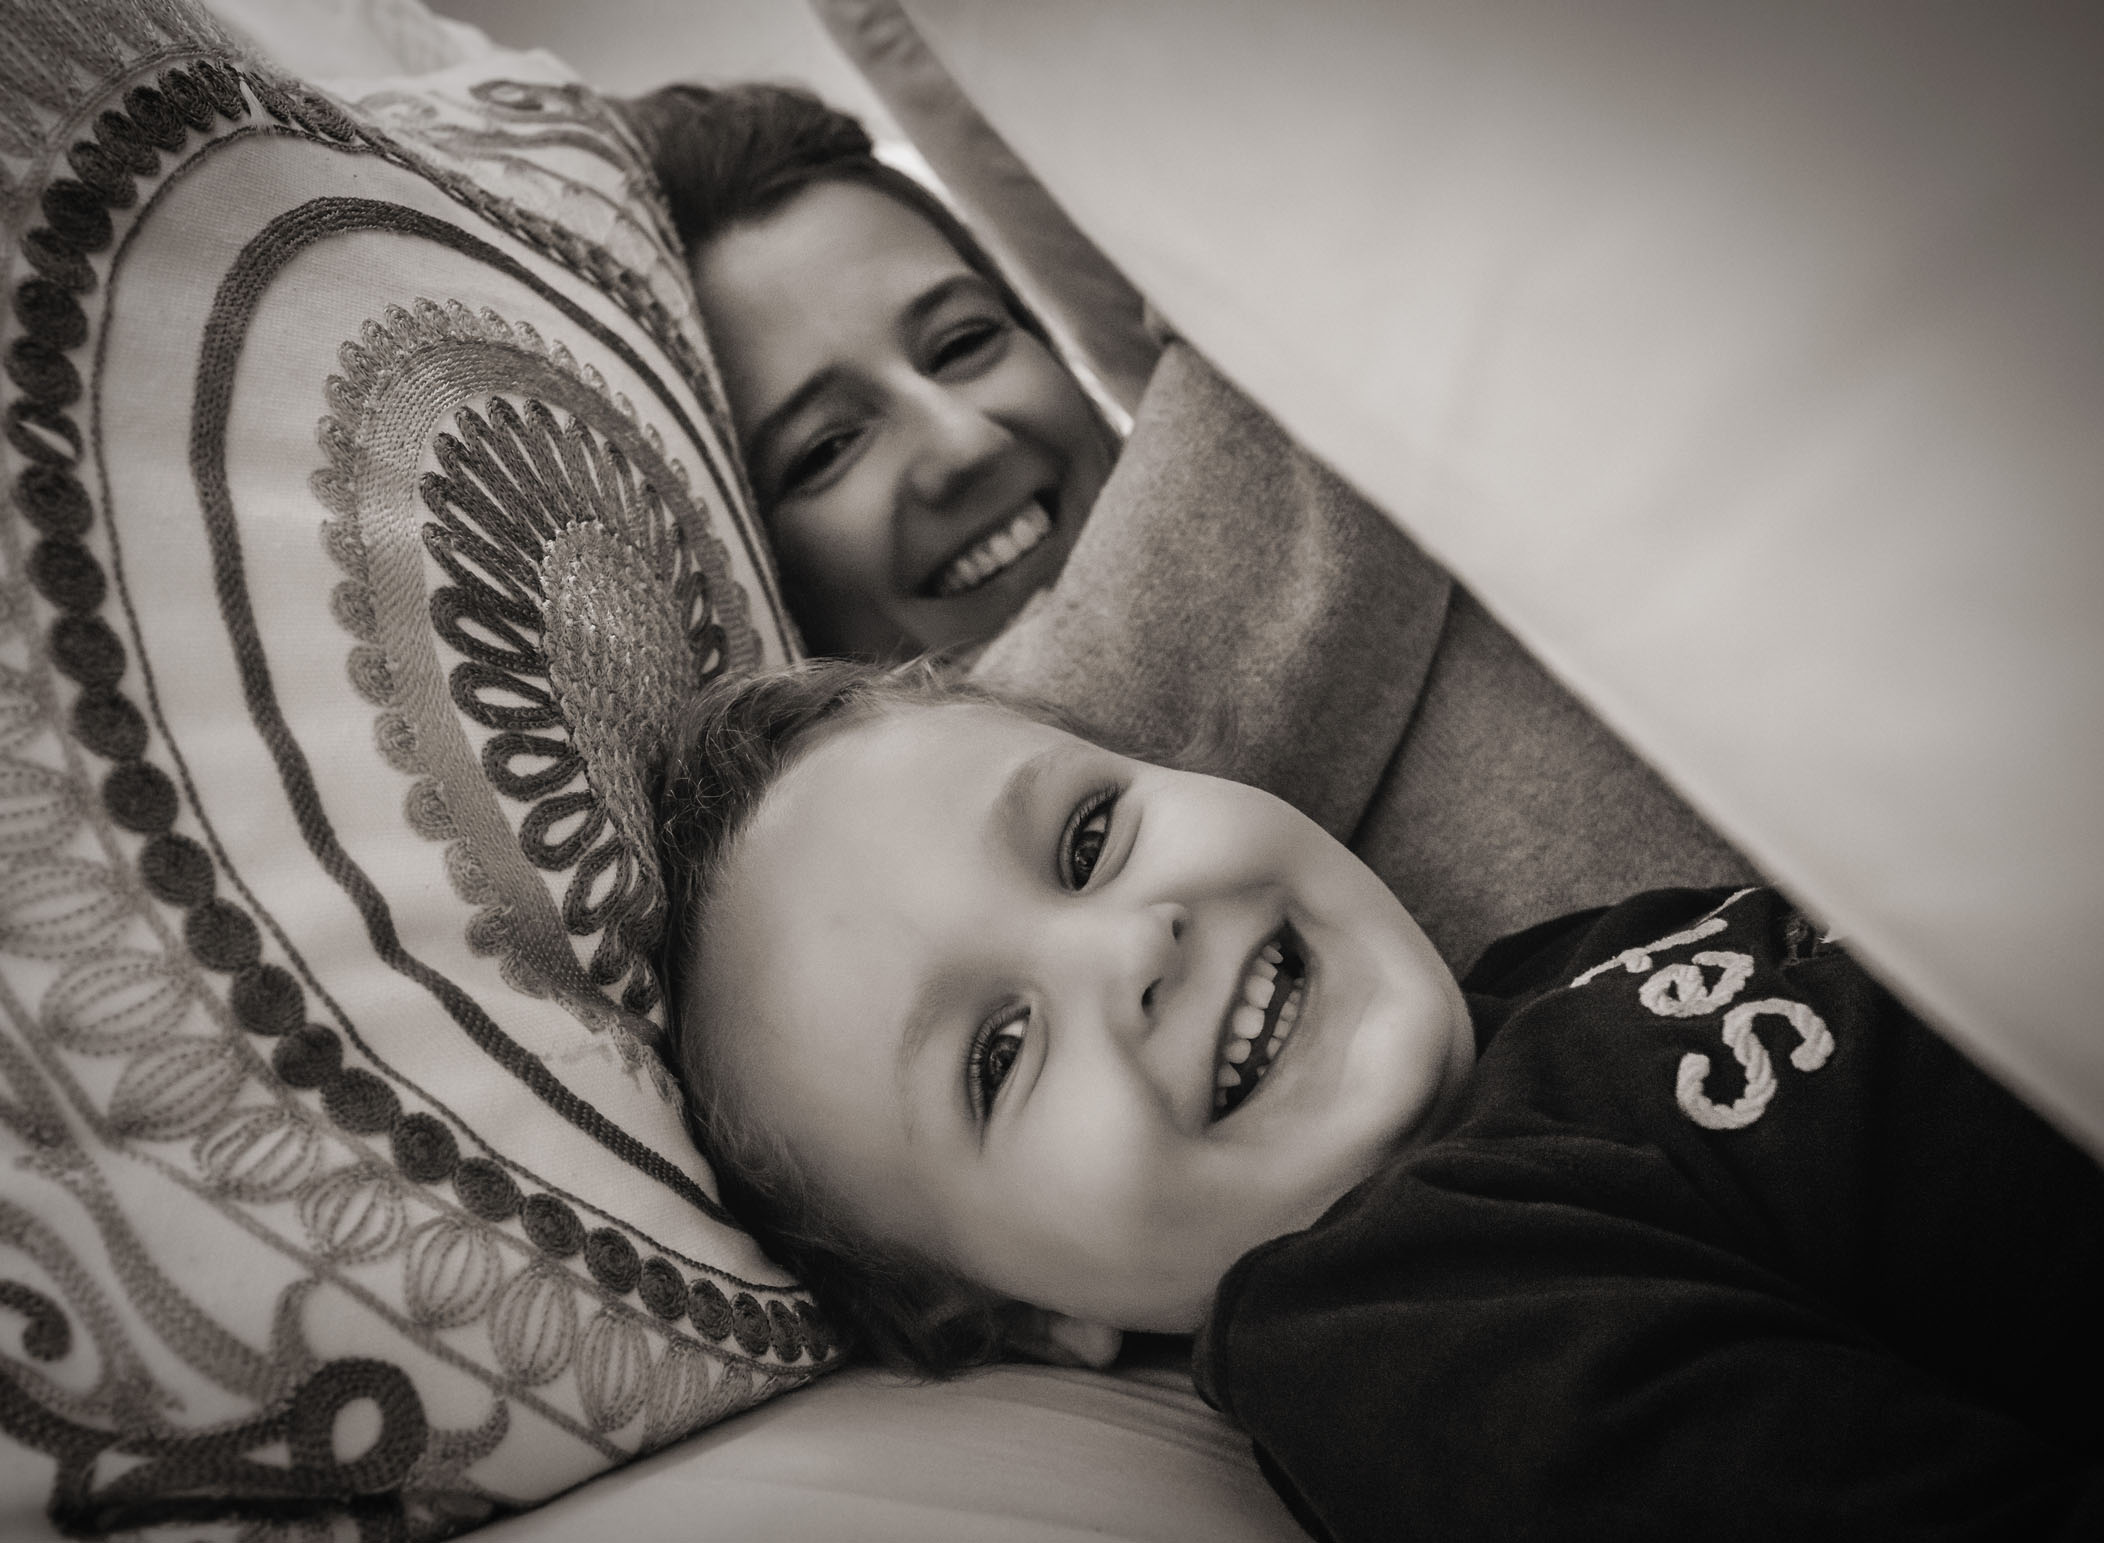 Mom and son playing under the covers